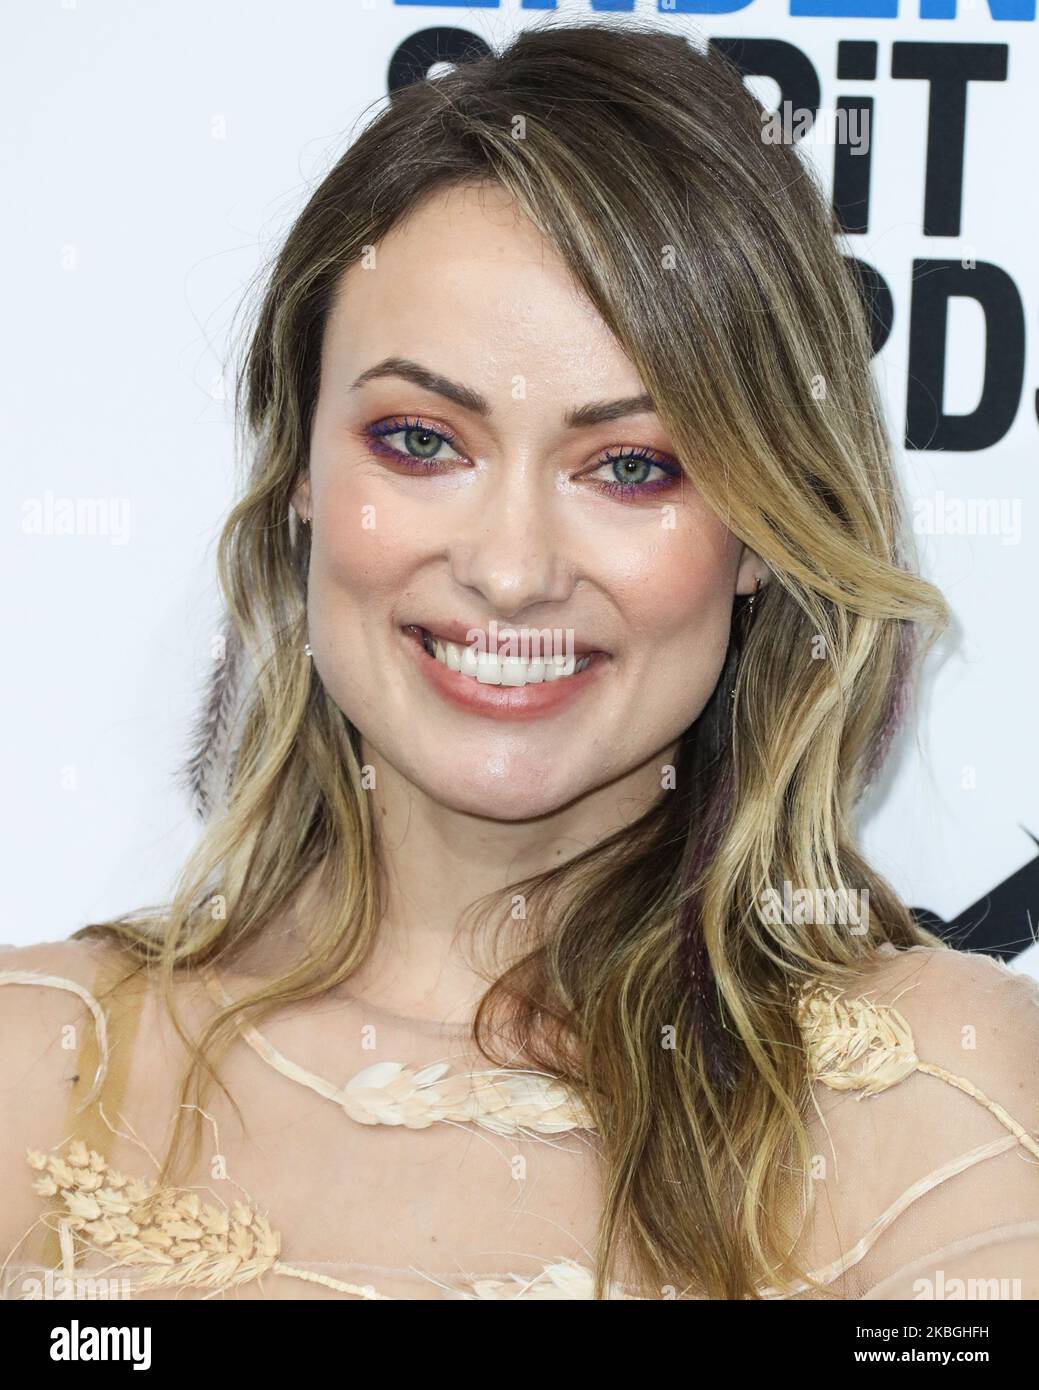 SANTA MONICA, LOS ANGELES, CALIFORNIA, USA - FEBRUARY 08: Actress Olivia Wilde poses in the press room with the Best First Feature award for the film 'Booksmart' at the 2020 Film Independent Spirit Awards held at the Santa Monica Beach on February 8, 2020 in Santa Monica, Los Angeles, California, United States. (Photo by Xavier Collin/Image Press Agency/NurPhoto) Stock Photo